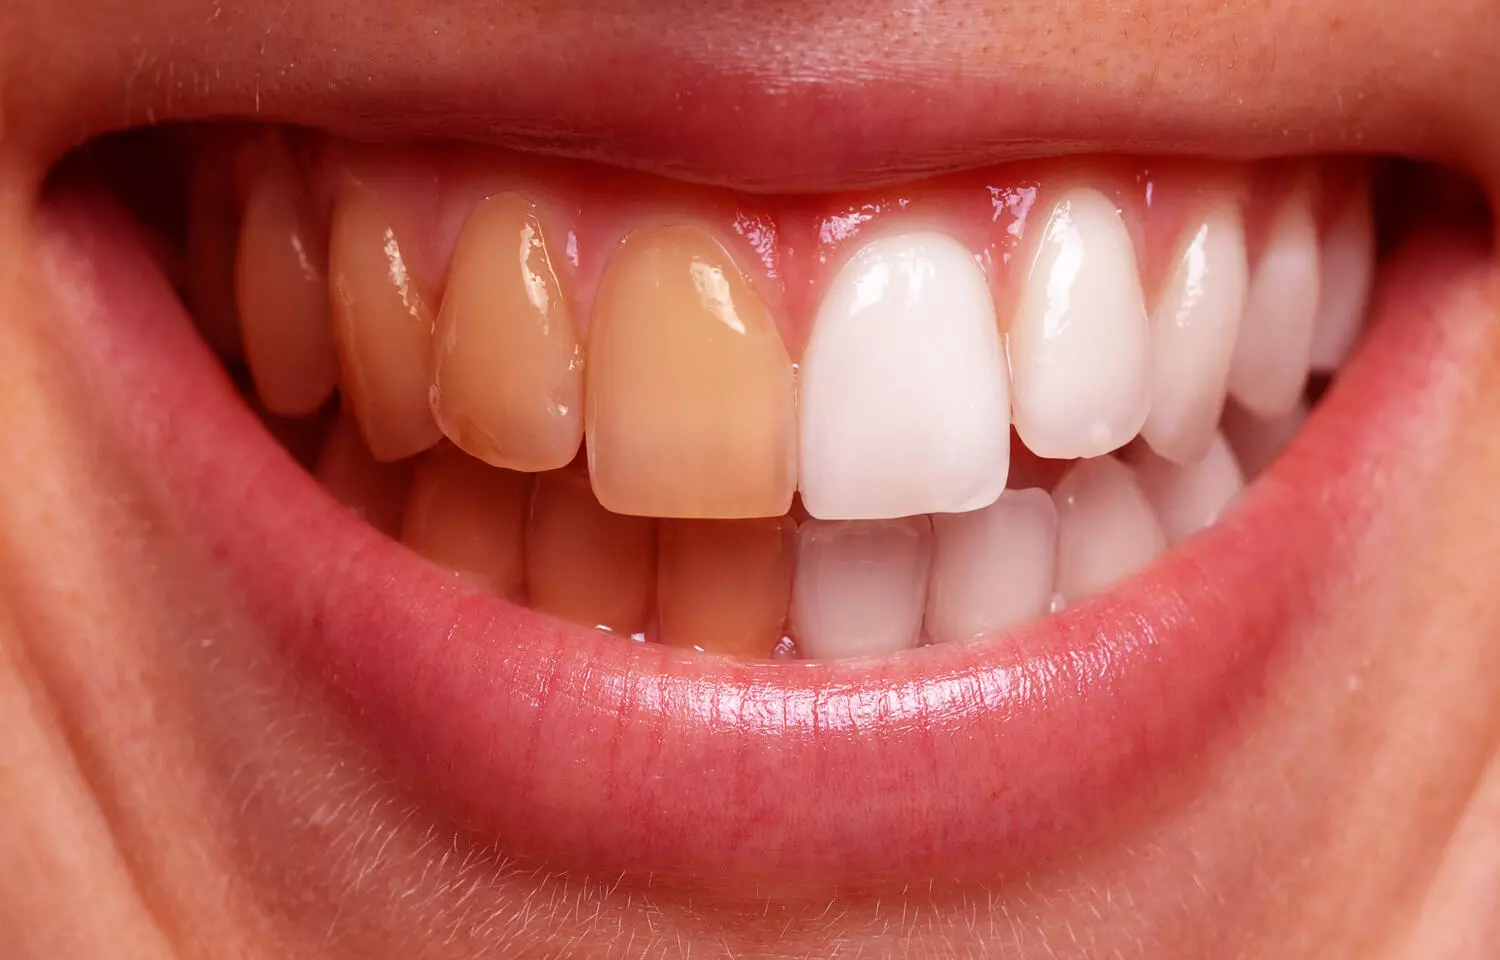 Different phases of  calcium aluminate cement linked to tooth discoloration: Study